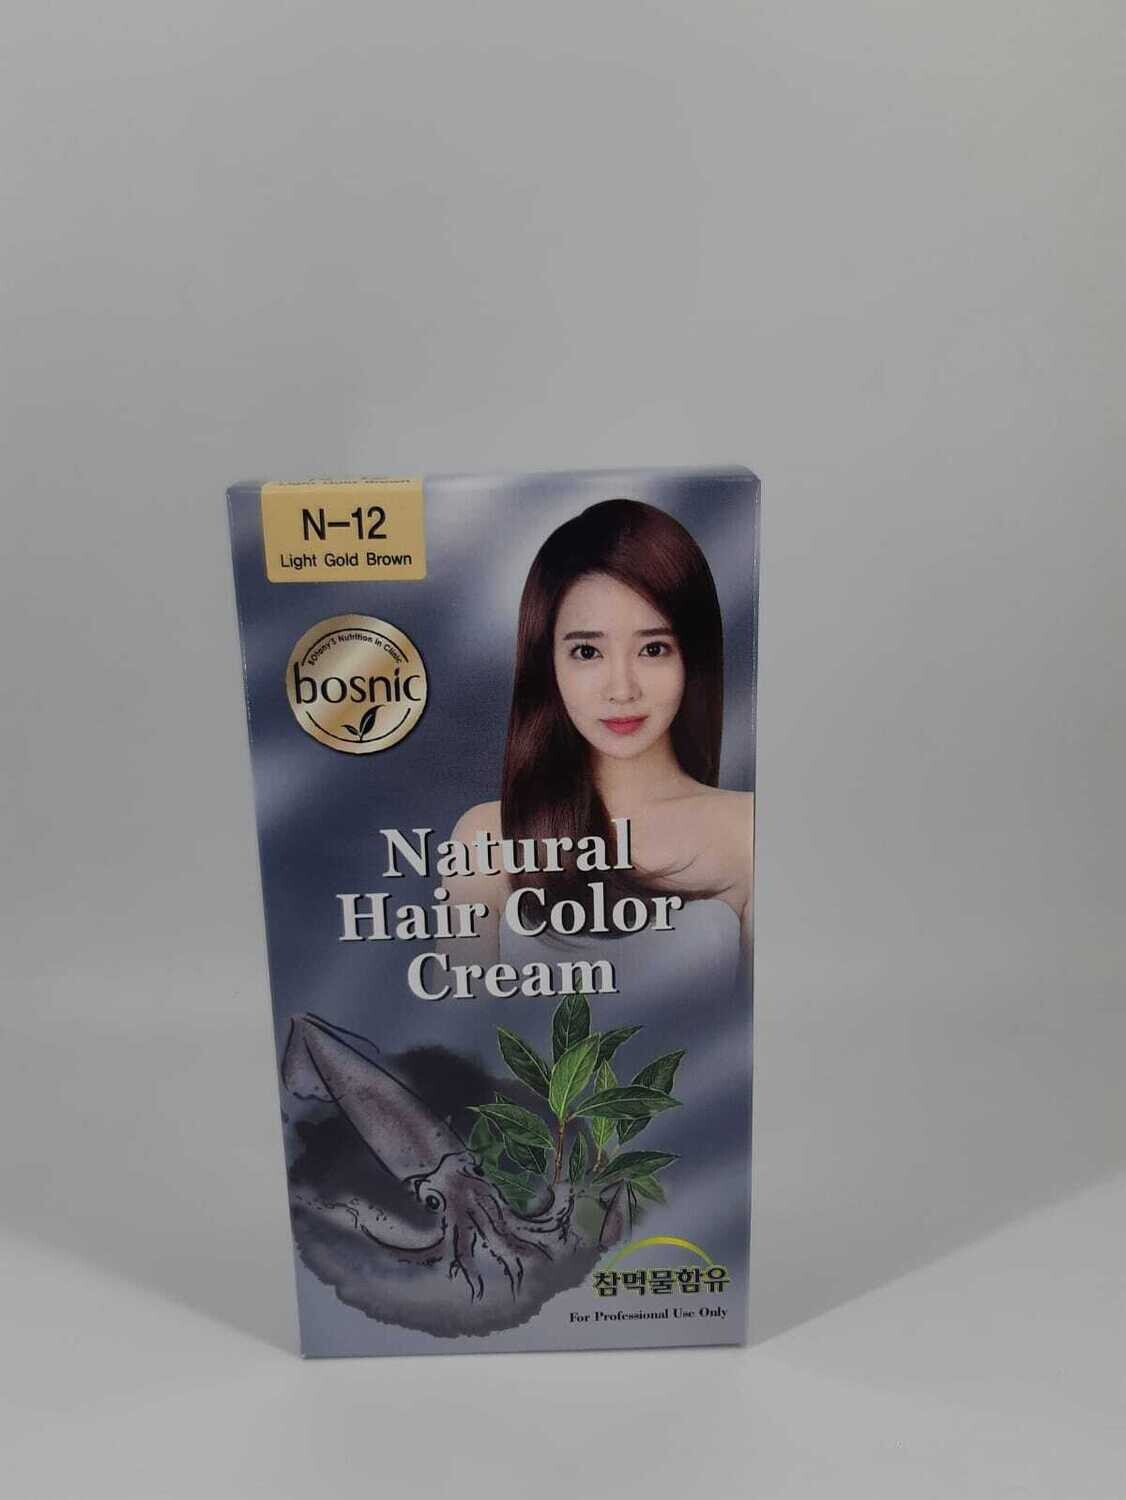 Bosnic N-12 Light Gold Brown Natural Hair Color Cream